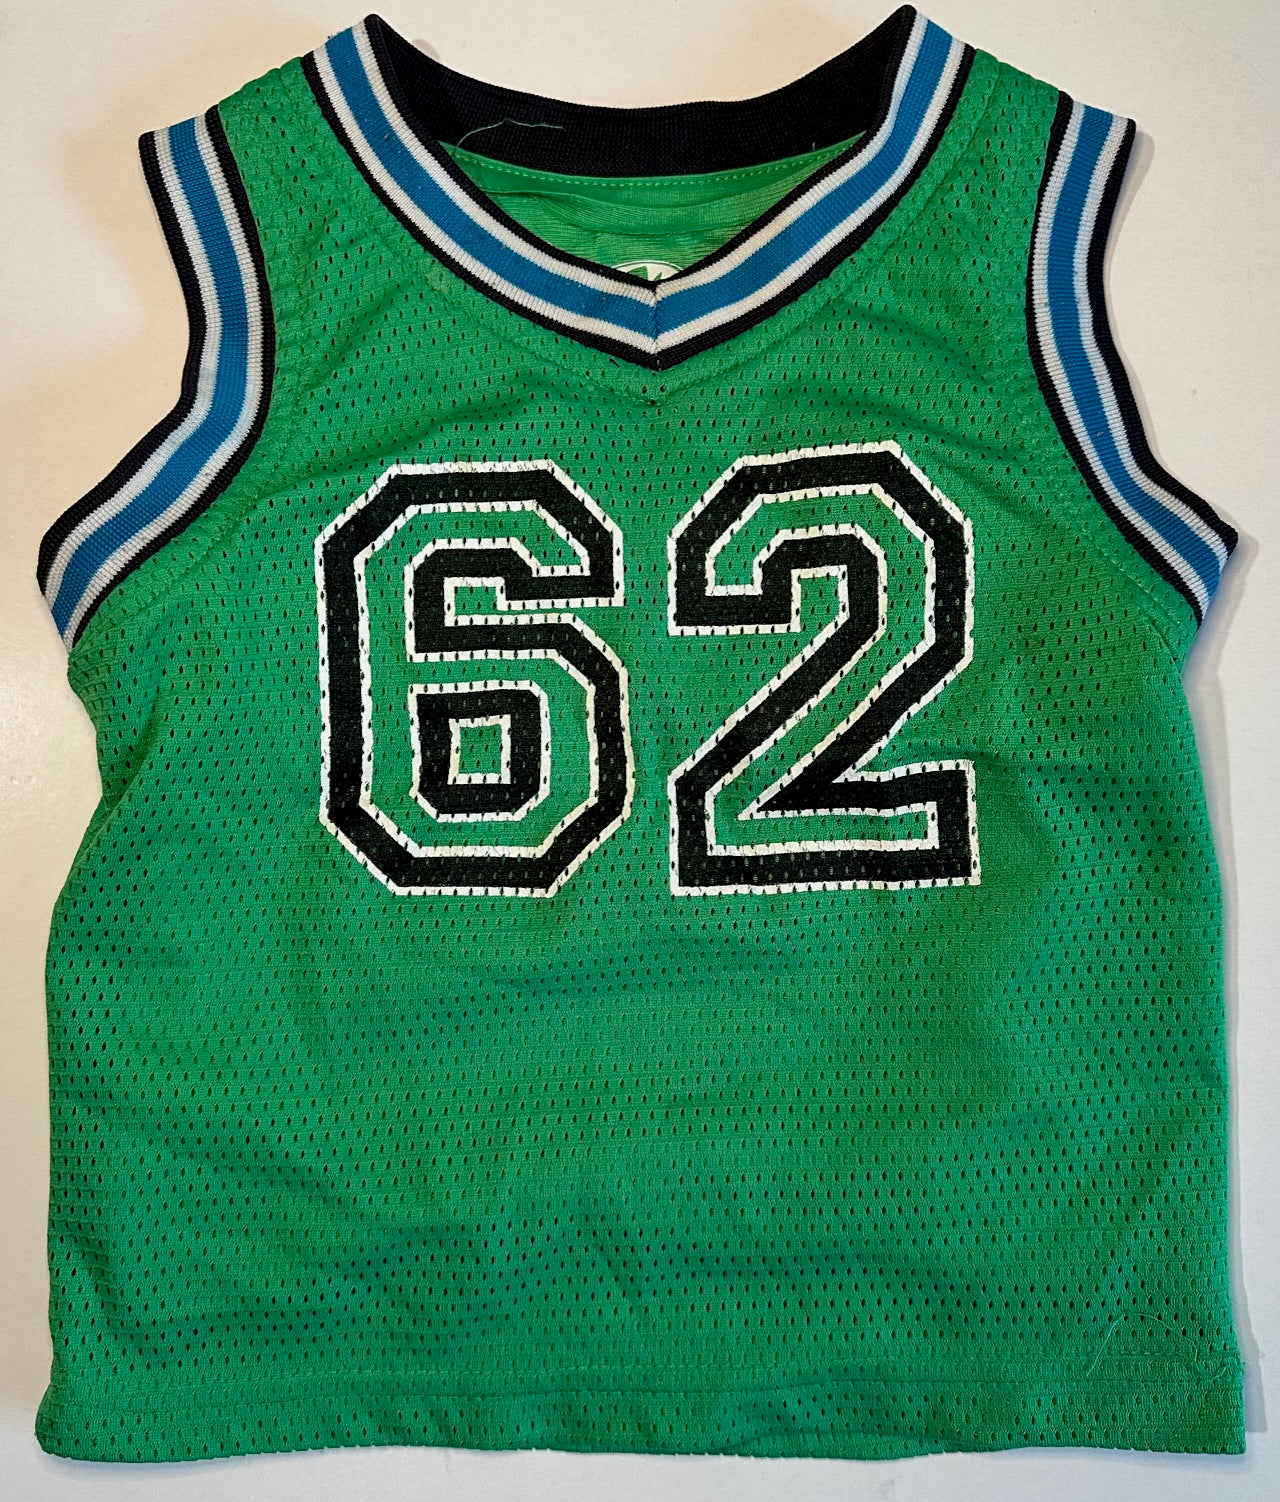 Athletic Works, Green Sleeveless Jersey - Size 2T